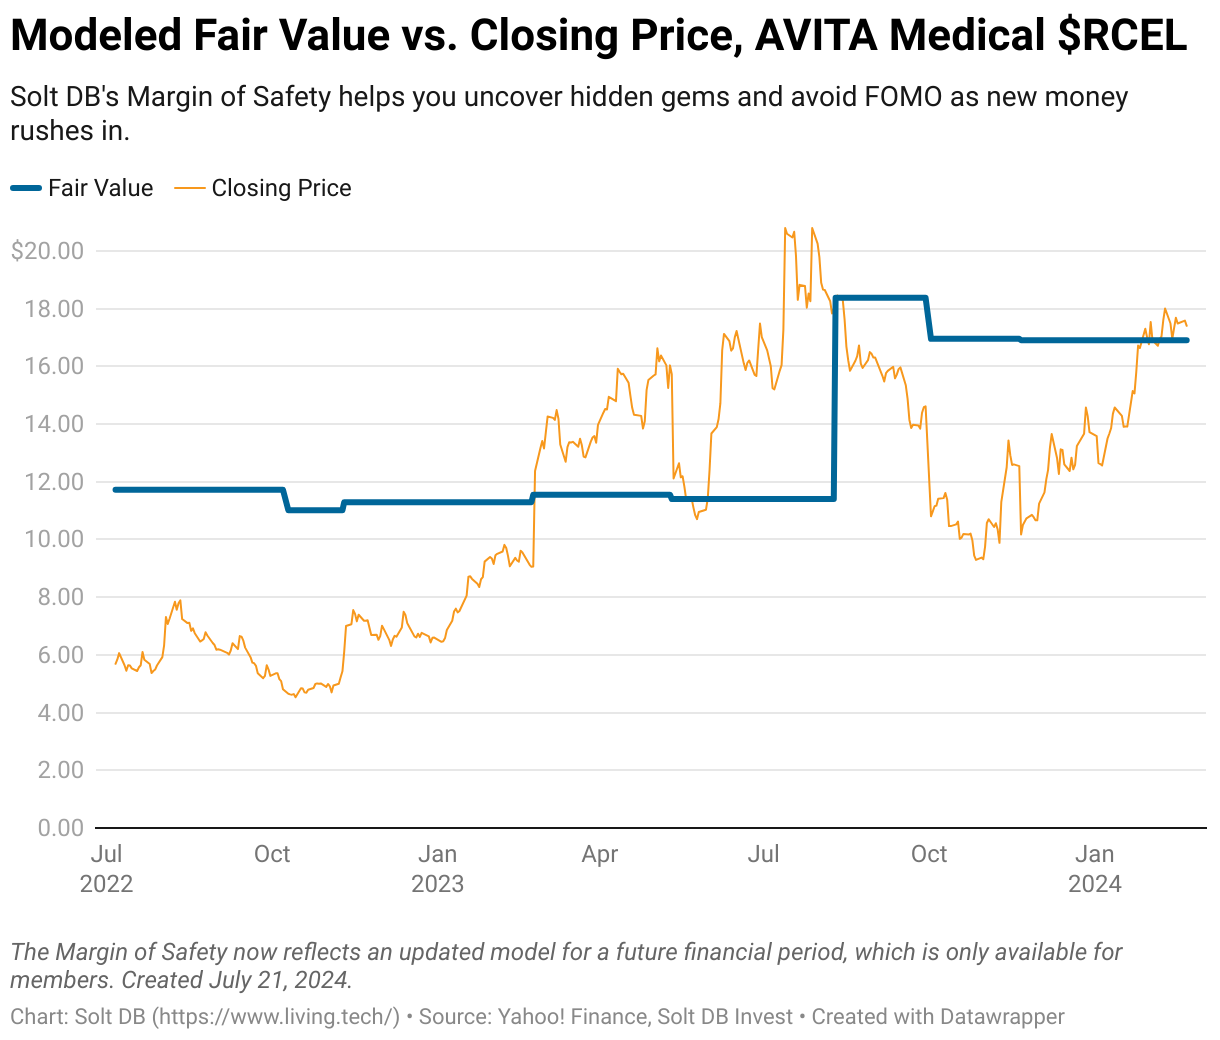 A chart showing the closing price of AVITA Medical and our modeled fair value from July 2022 through February 2024.